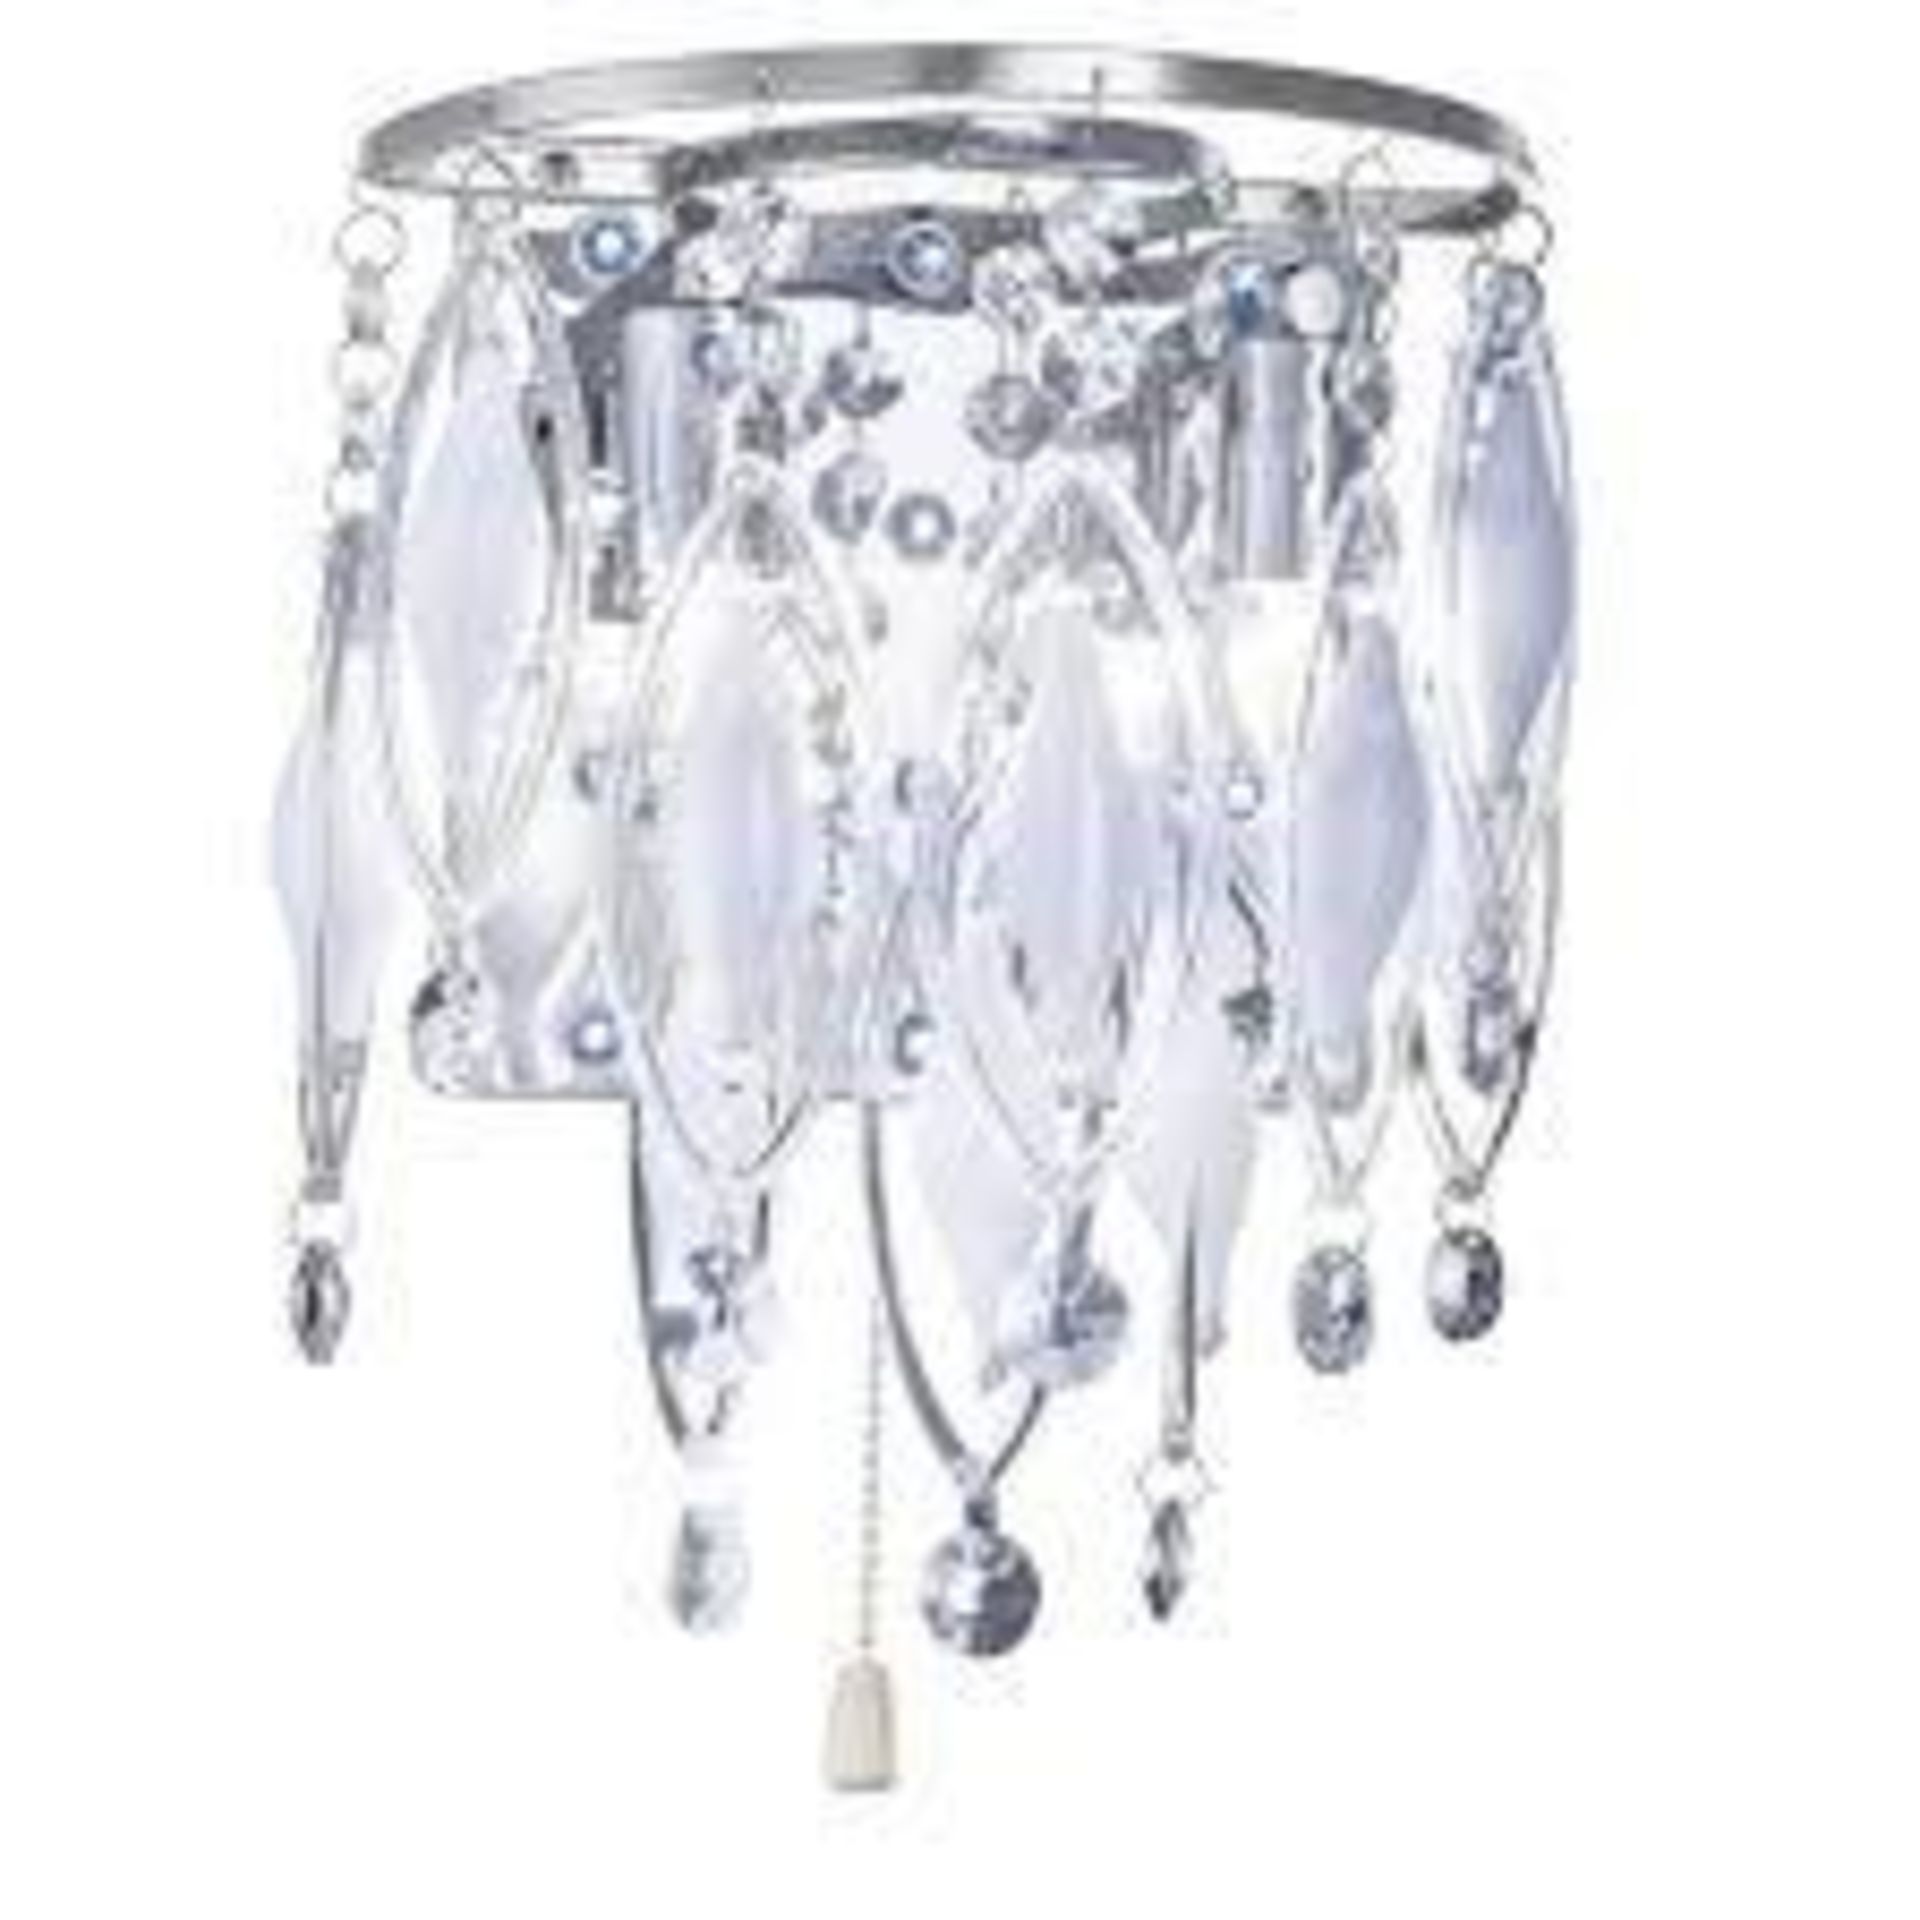 1 x Searchlight Spindle Wall Bracket in a chrome finish with white and clear glass drops - Ref: 3352 - Image 5 of 5